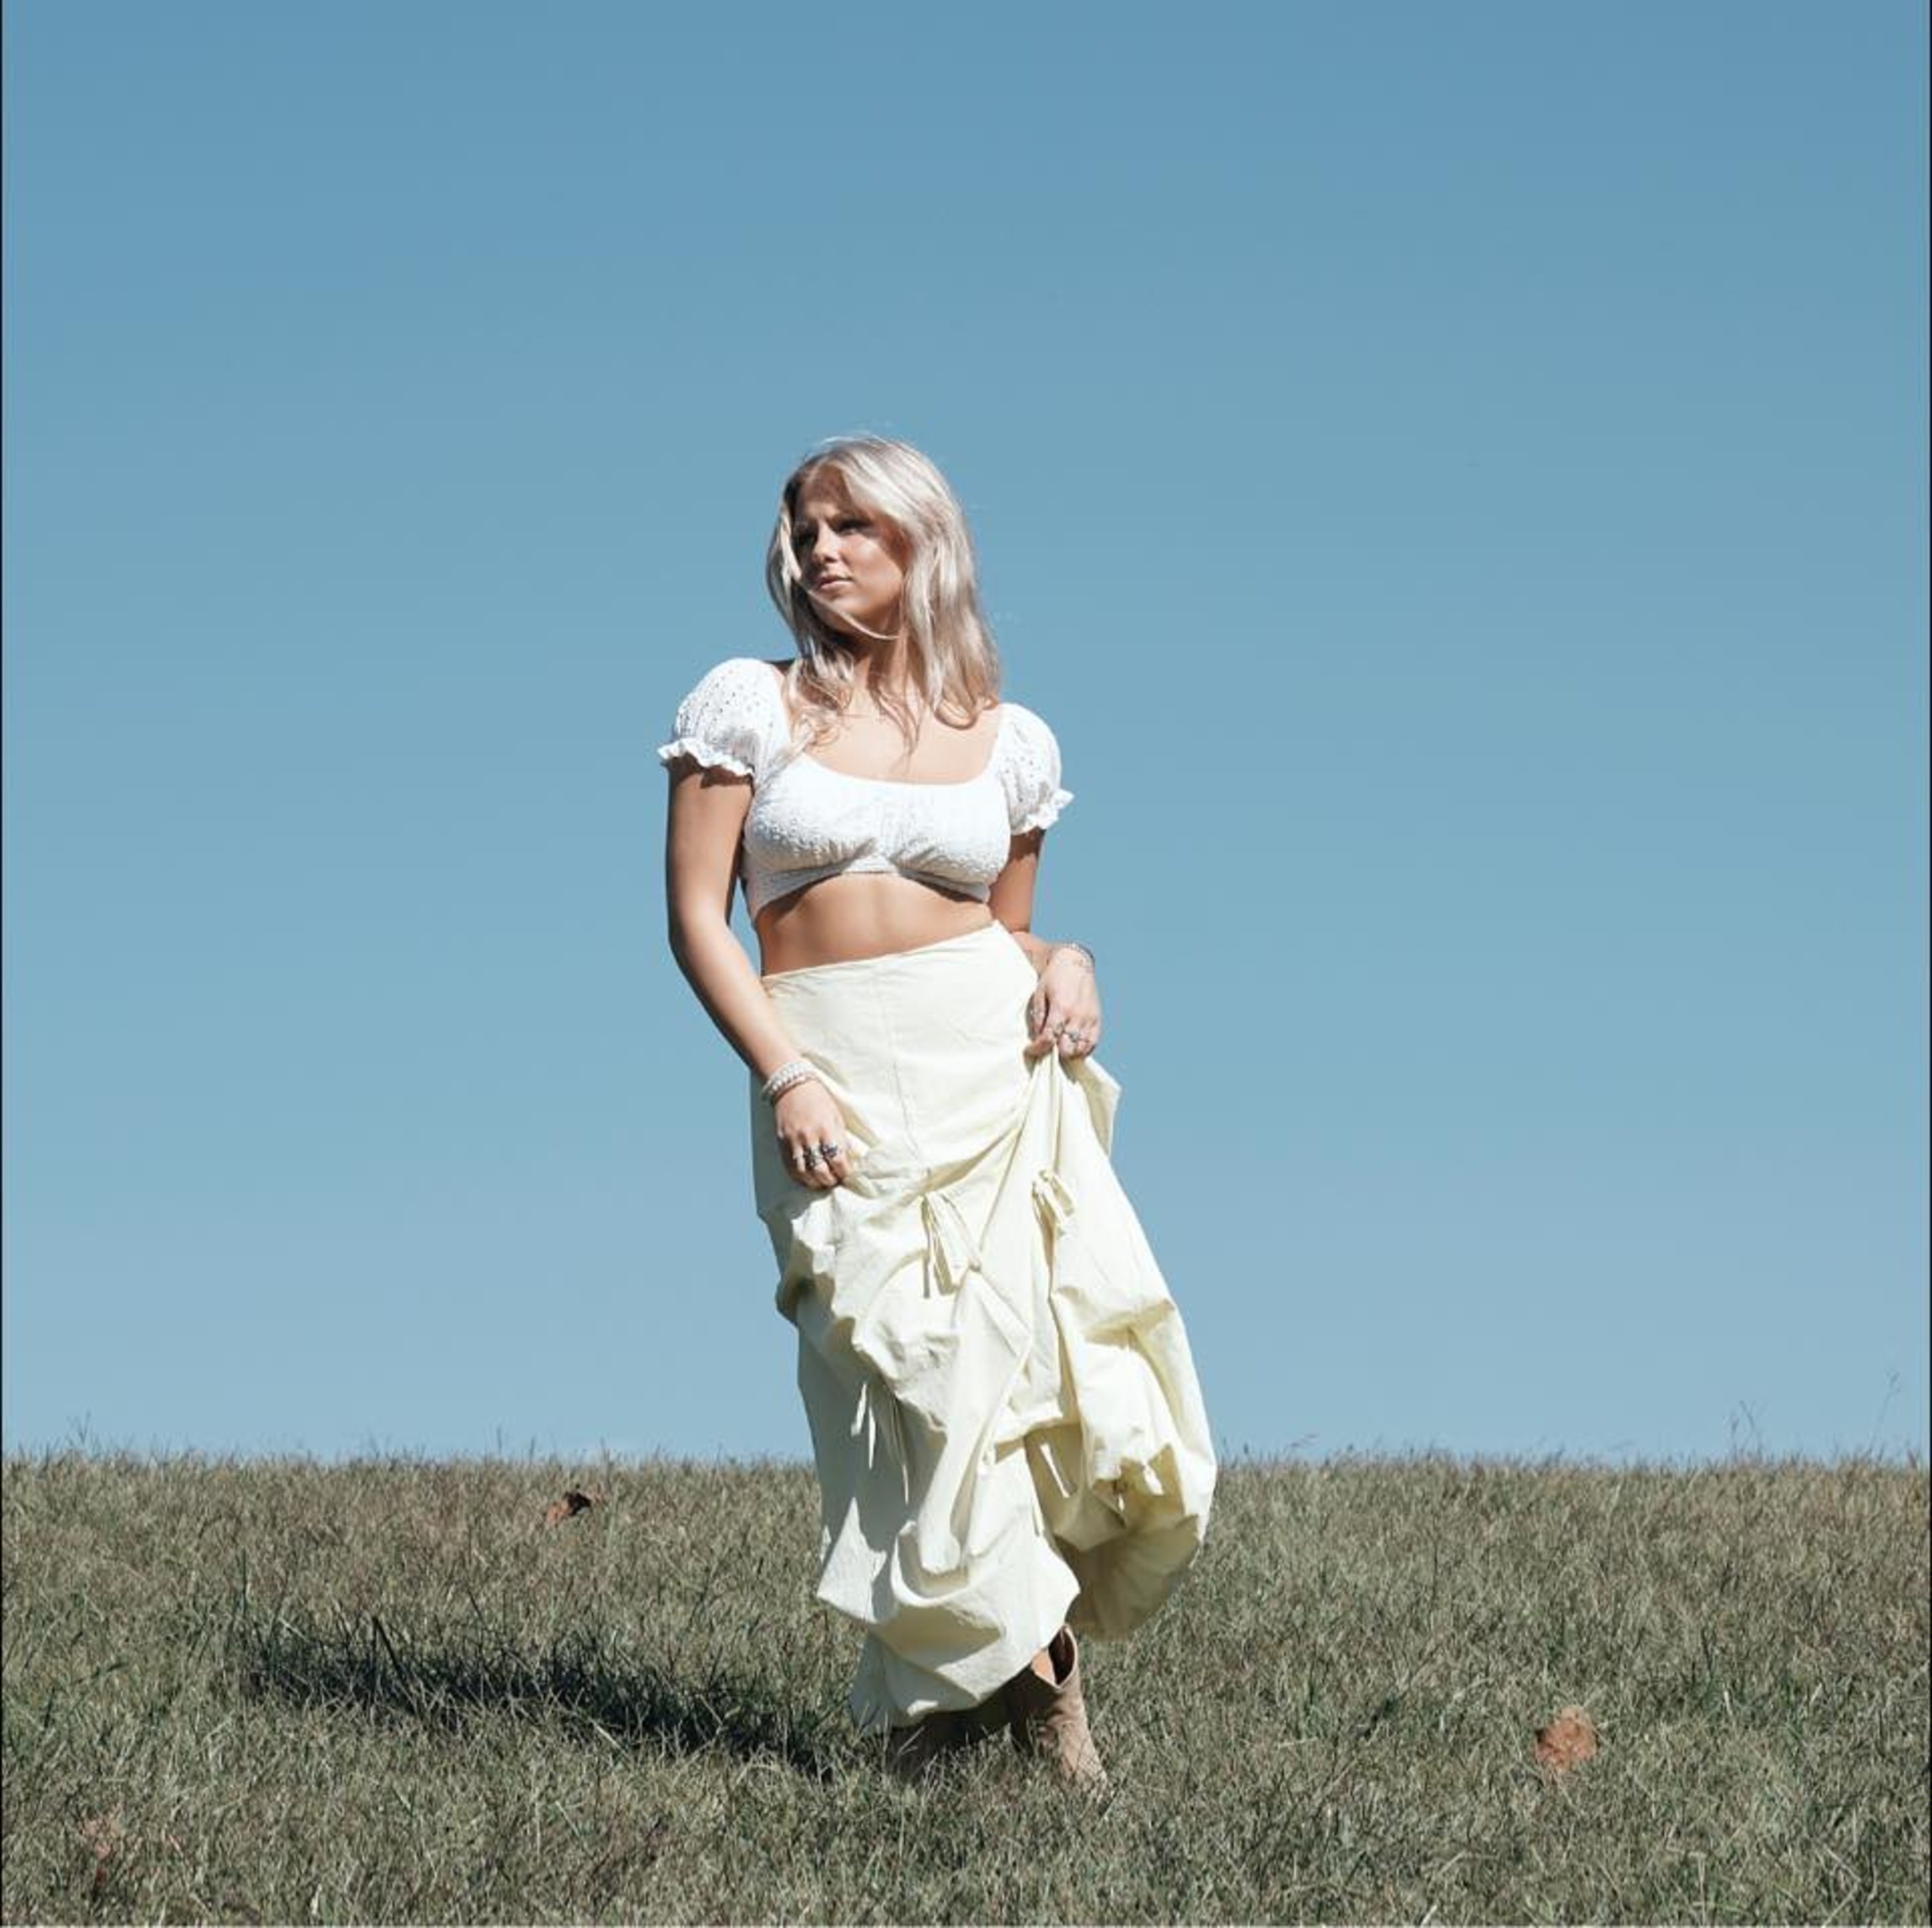 <p>At just 19 years old, singer-songwriter Ashley Anne writes heartfelt, emotion-drenched lyrics that are wise beyond her years. Just listen to "Dear Dolly," a tune addressed to the legend Dolly Parton herself, as proof. </p><p>You may also like: <a href='https://www.yardbarker.com/entertainment/articles/beloved_movies_from_the_1970s_that_still_hold_up_today_031824/s1__32912261'>Beloved movies from the 1970s that still hold up today</a></p>